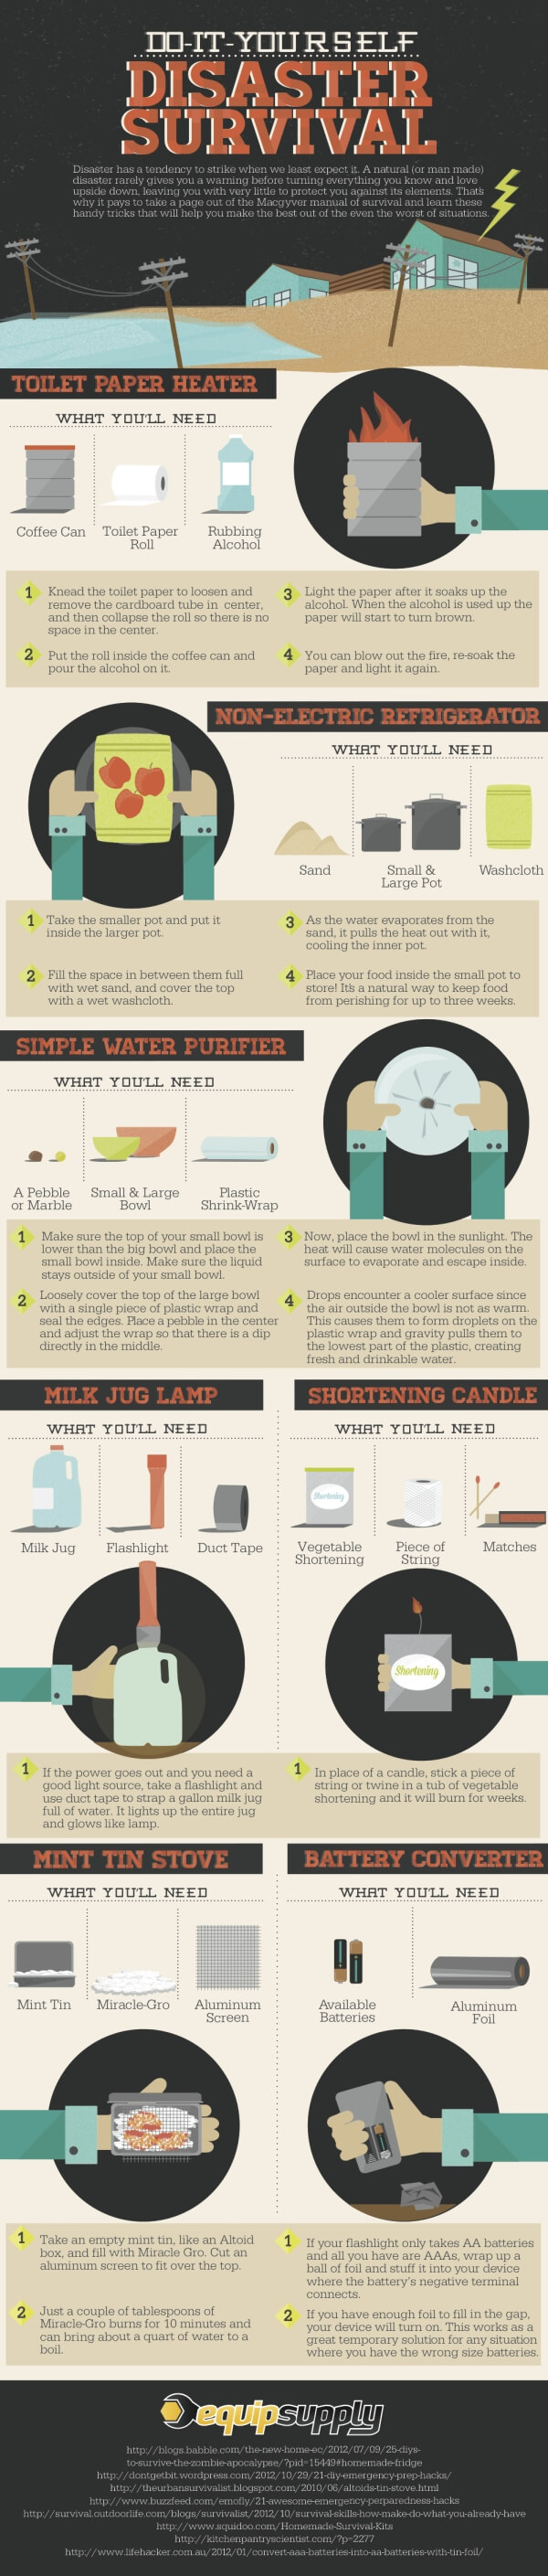 DIY Disaster Survival infographic